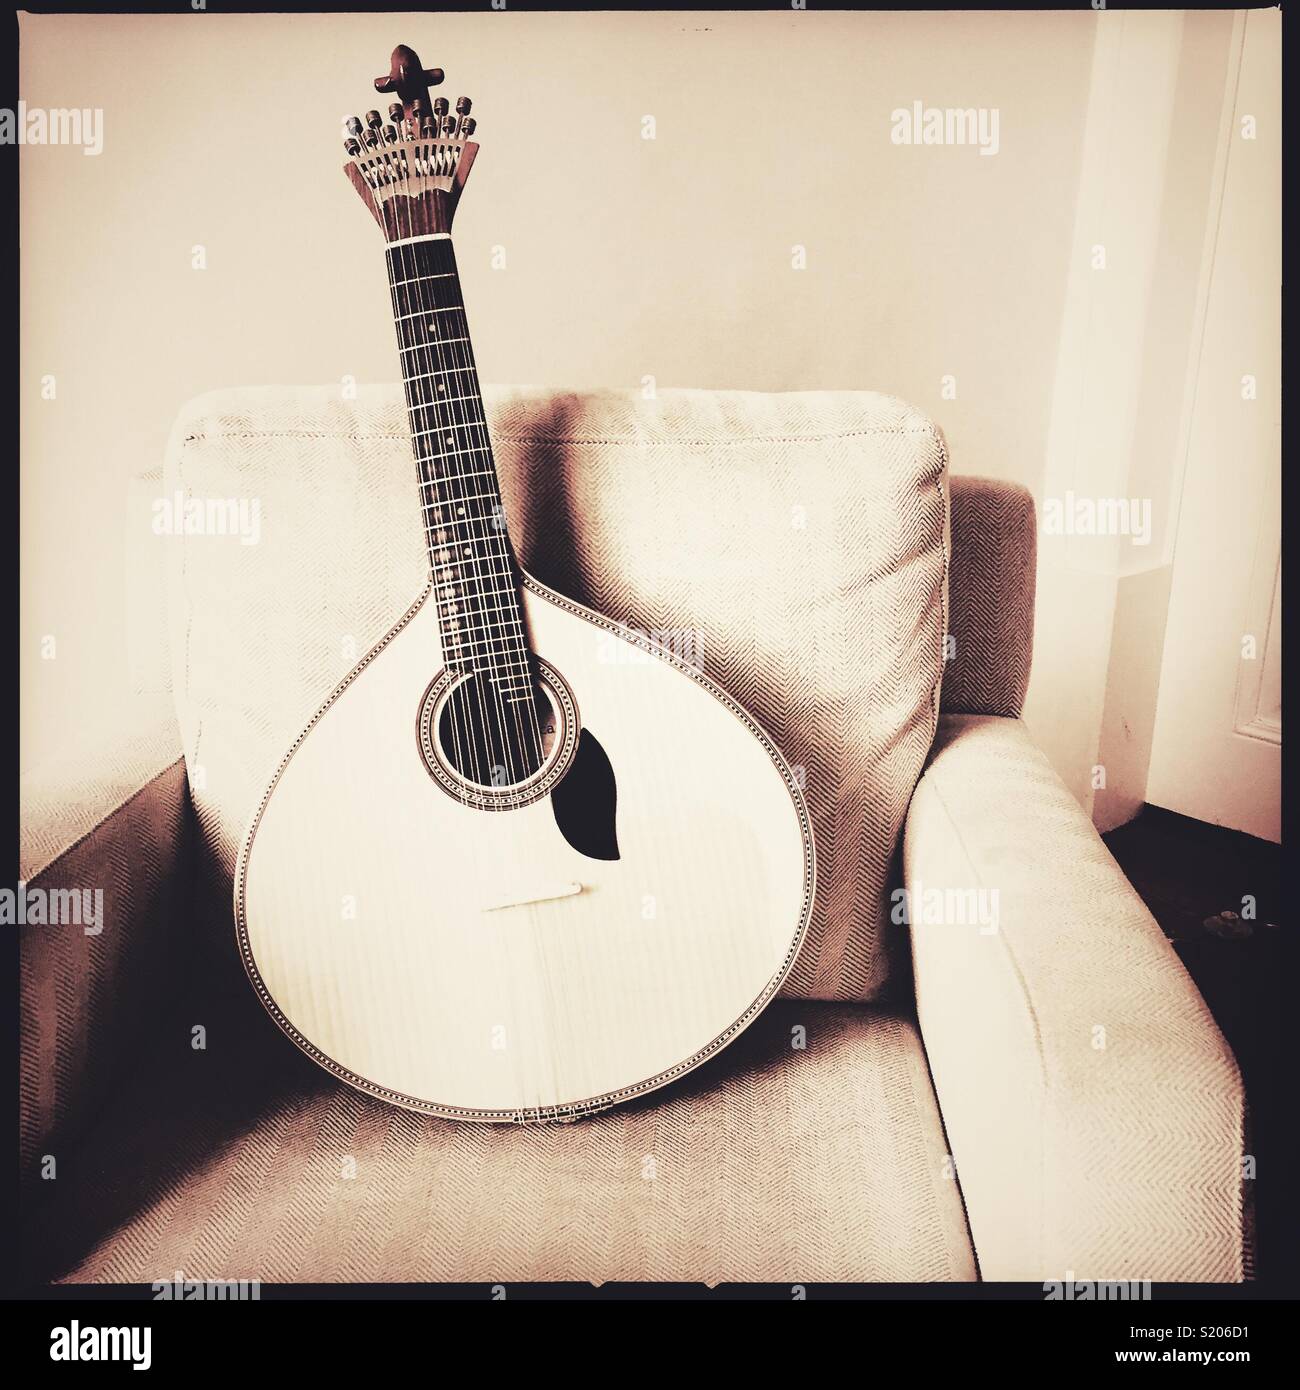 Portuguese guitar leaning on chair Stock Photo